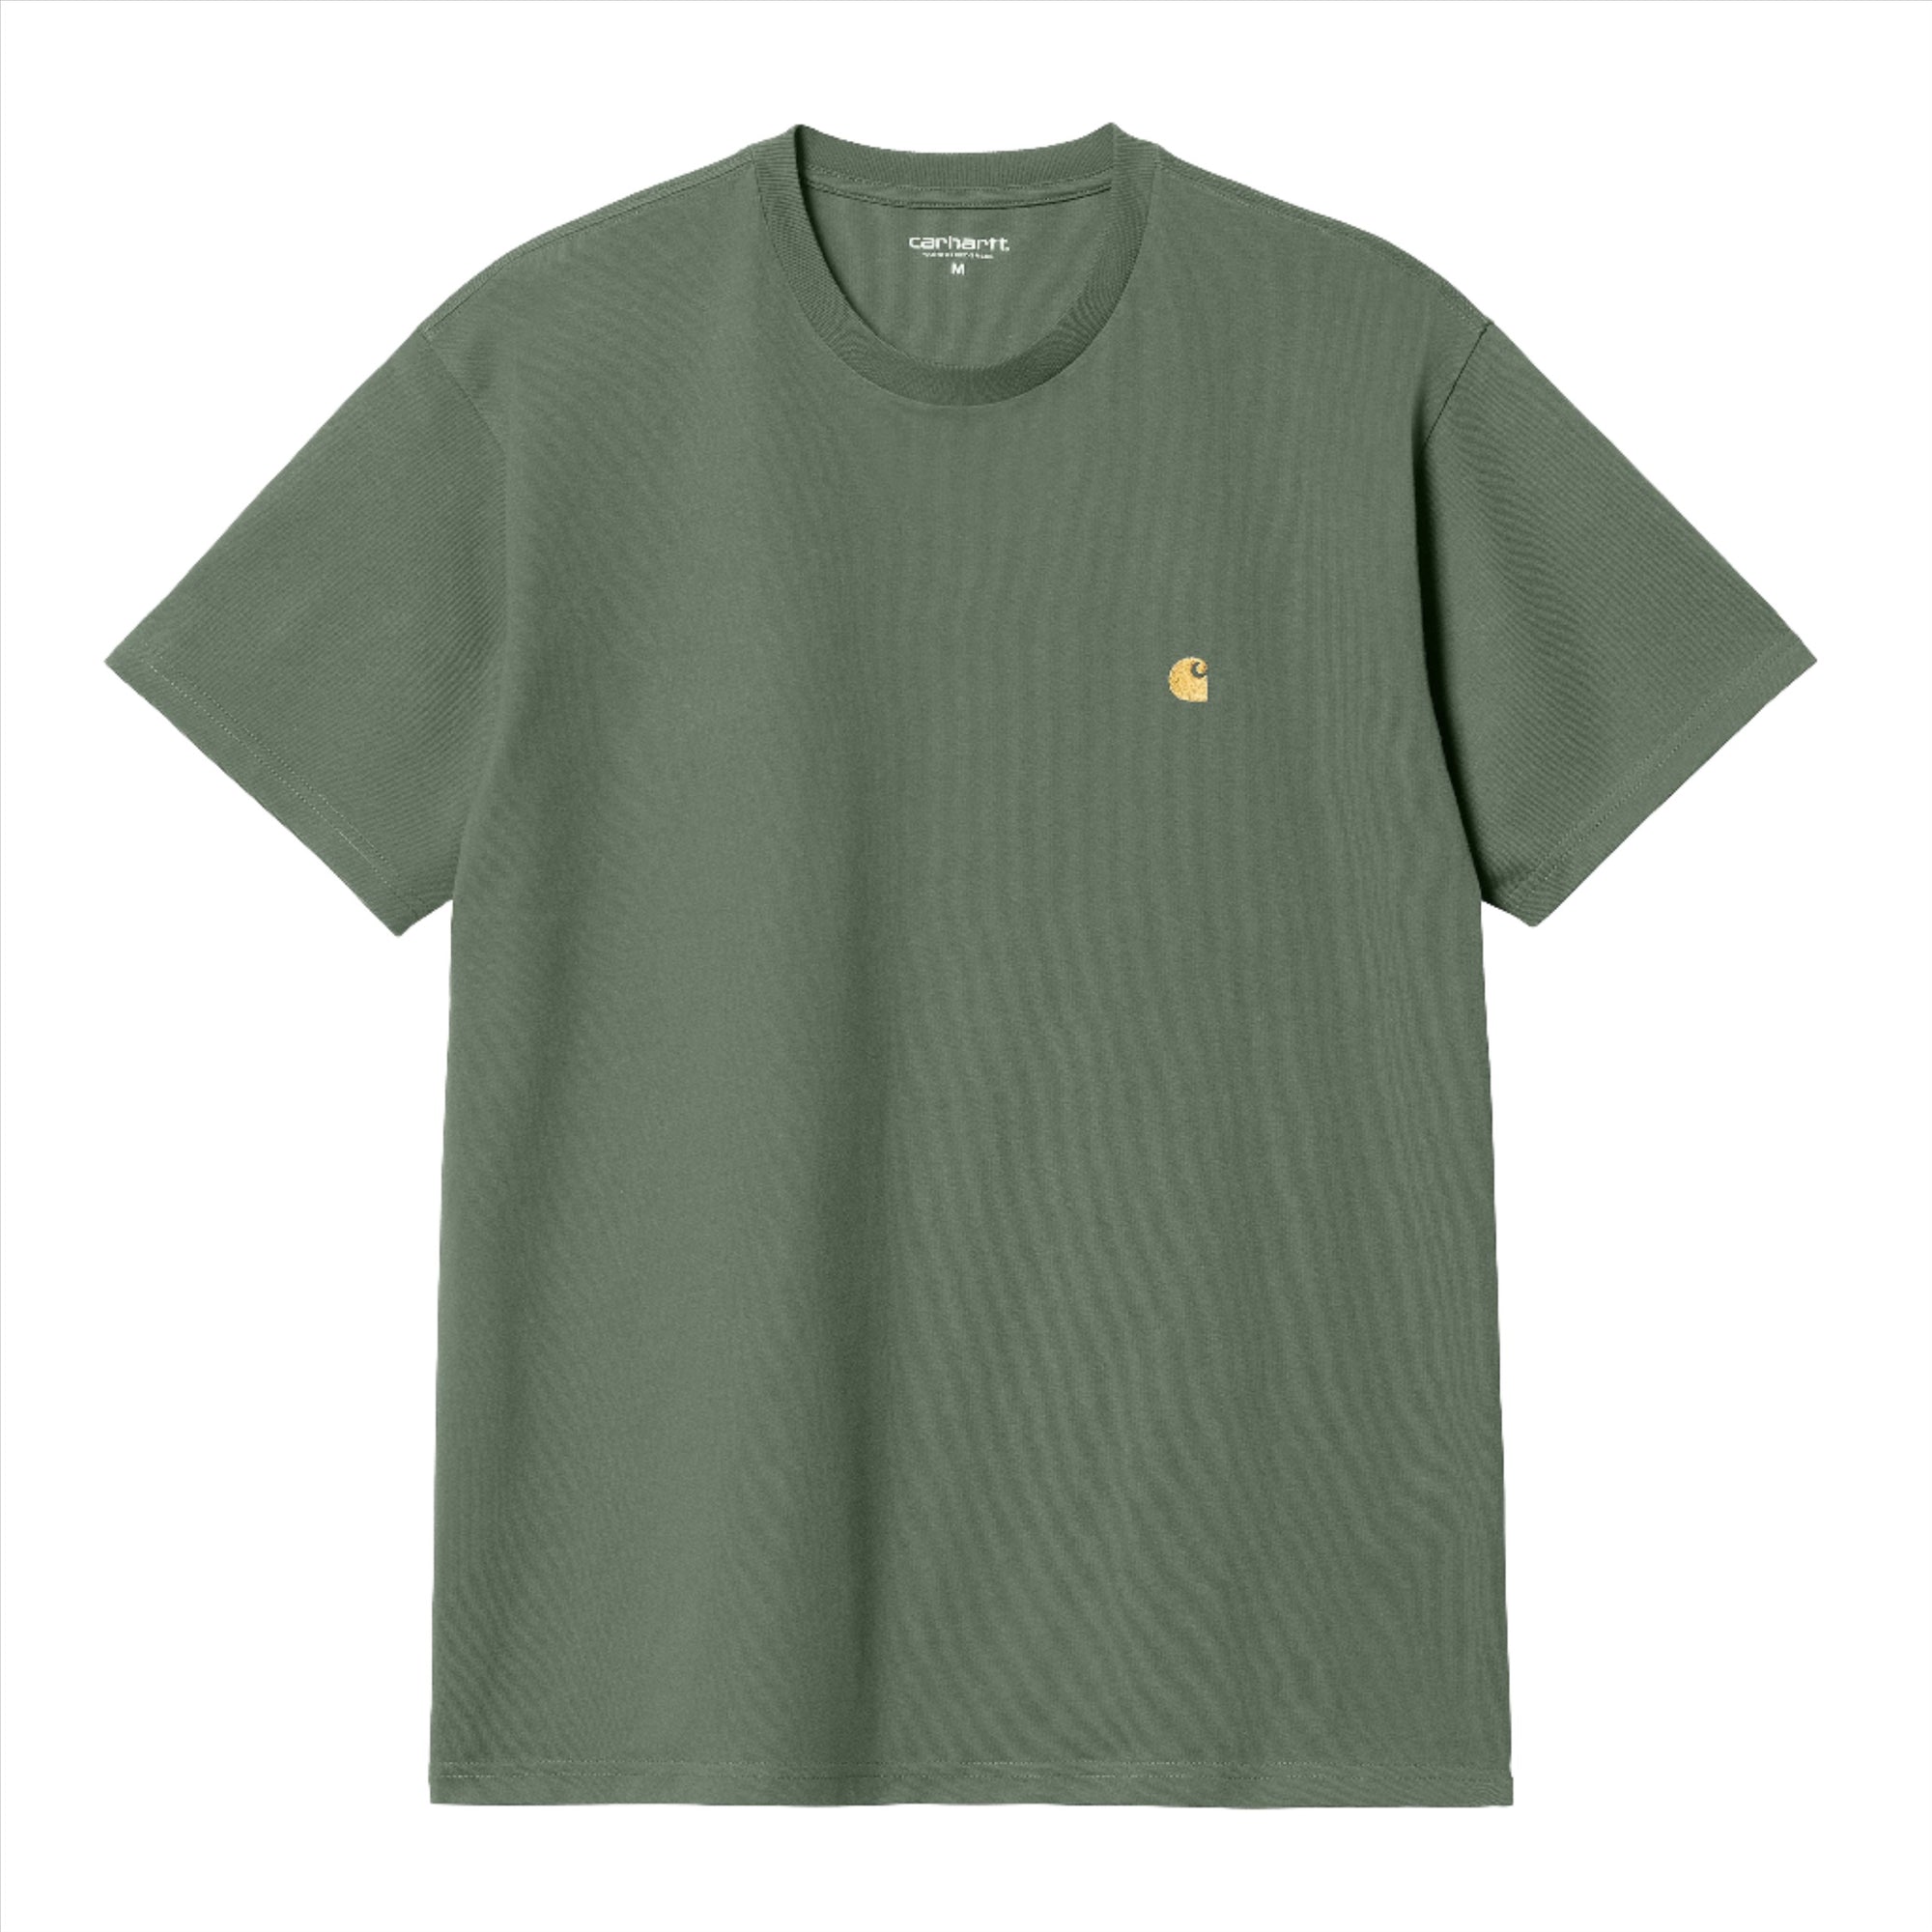 S/S CHASE T-SHIRT / CARHARTT WIP / DUCK GREEN